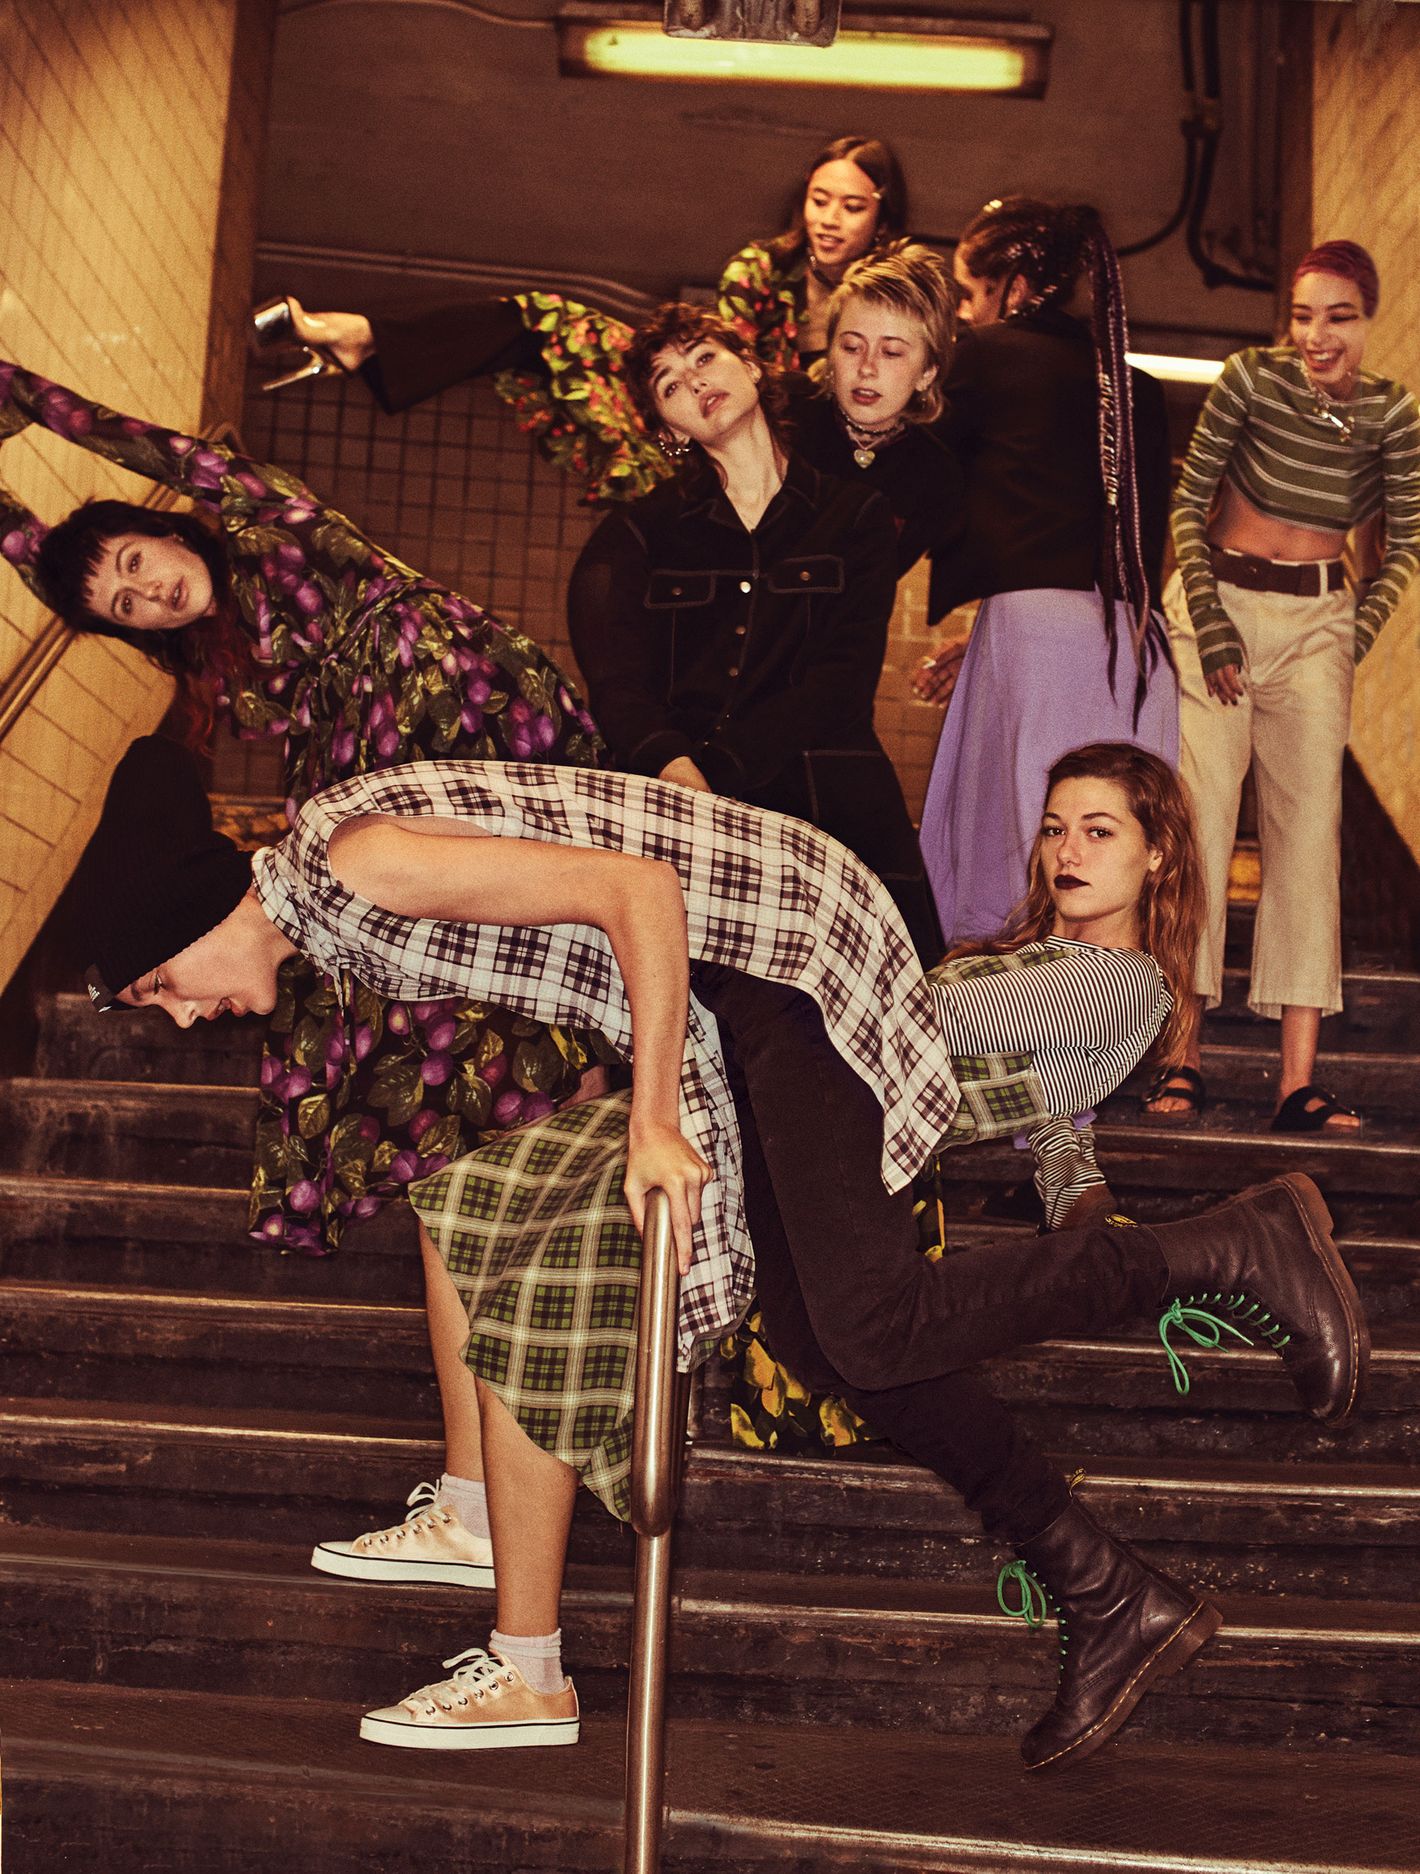 Marc Jacobs is reissuing his controversial 'Grunge' collection from the '90s  - Fashion Journal